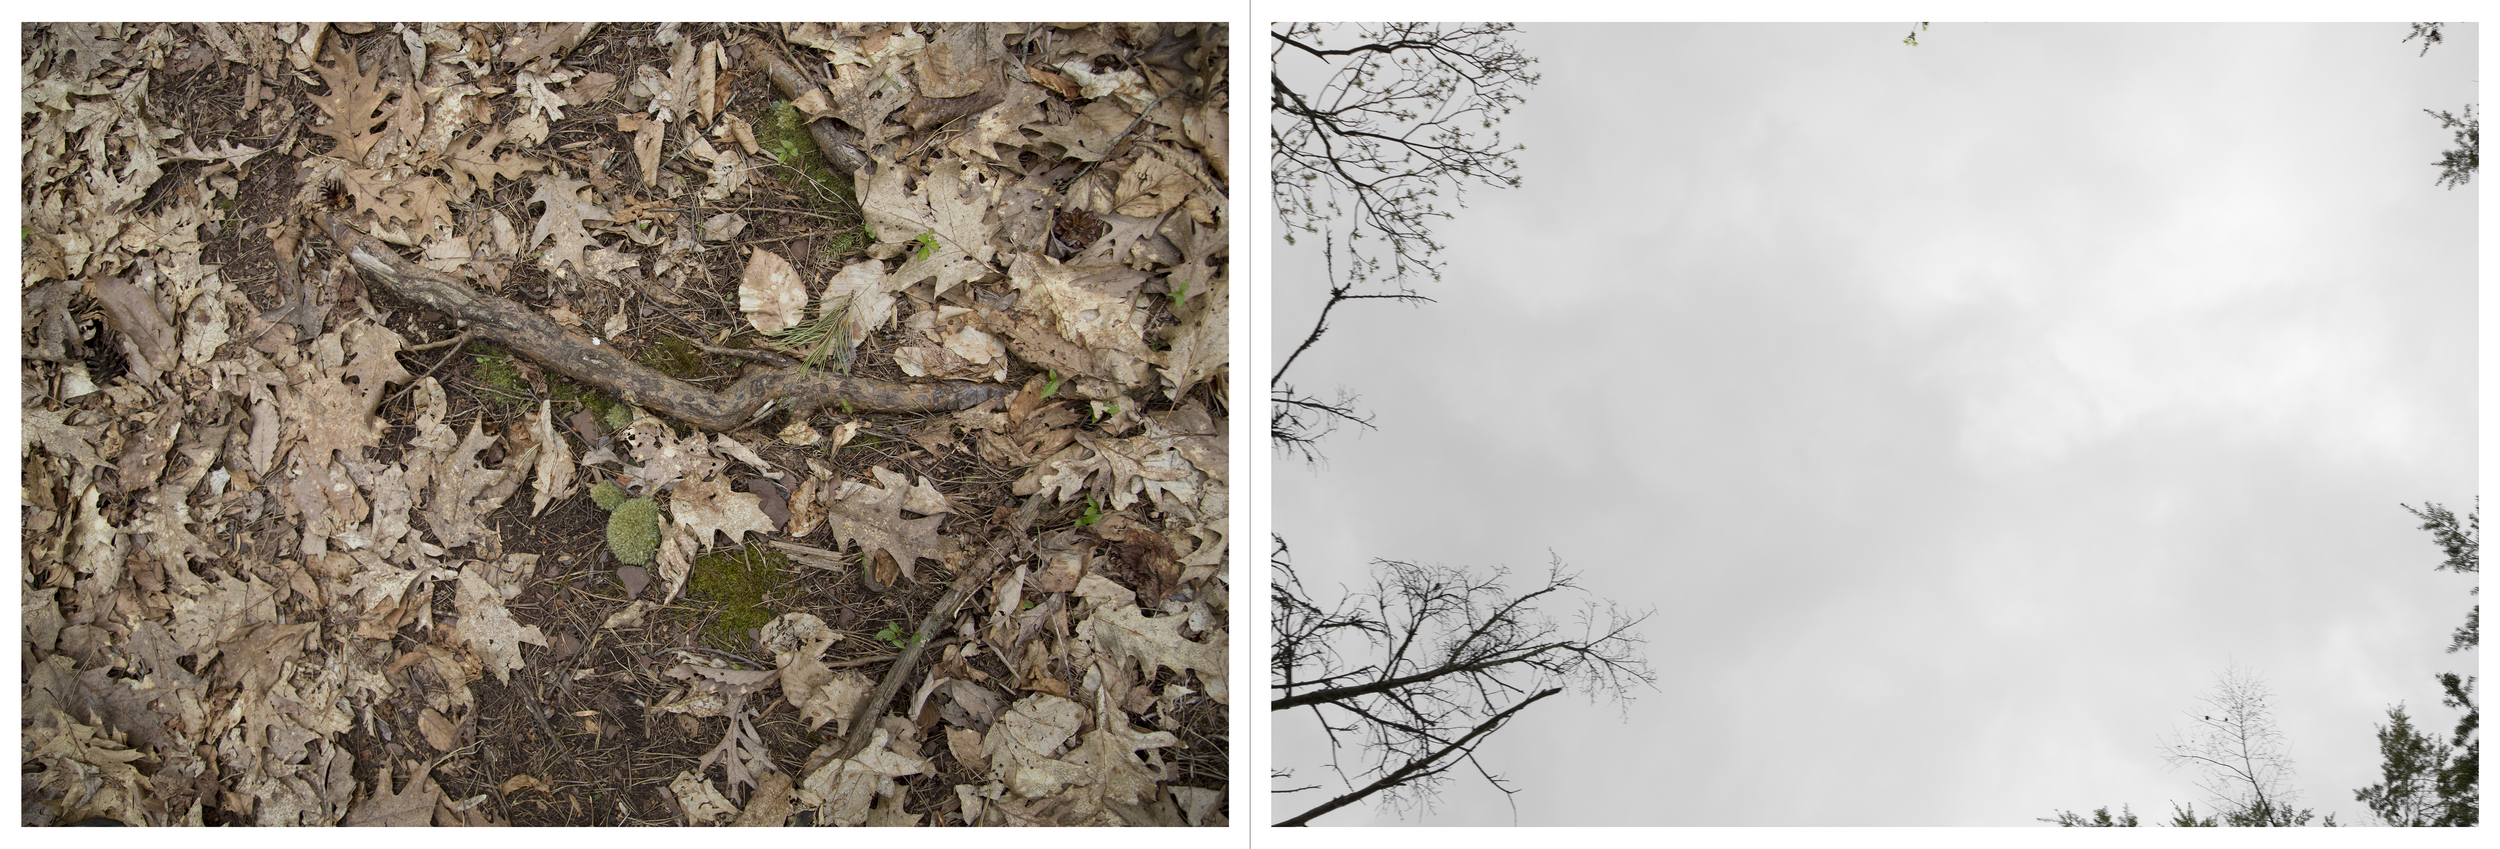 And so on and so forth in much the same vein: Mayapples, Inkjet Photograph, 24" X 72," 2015.